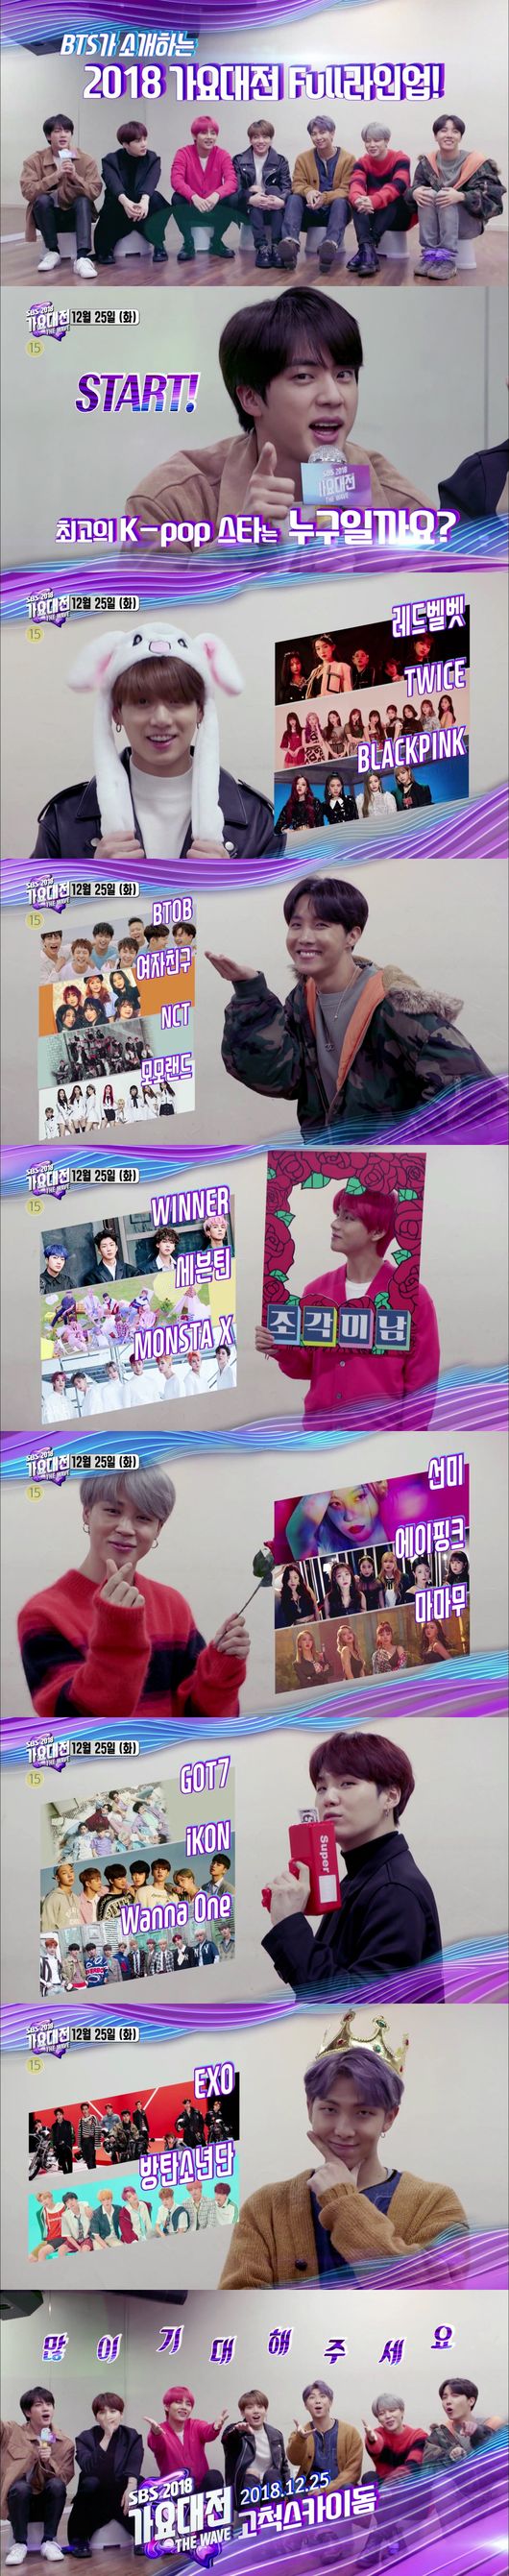 Today (9th) Inkigayo, the 2018 SBS k-pop year-end festival FULL Lineup introduced by BTS will be unveiled.Following the release of the first and second Lineup of the 2018 SBS k-pop year-end festival, BTS will appear as a guide to introduce the entire Lineup.BTS Jean raised the expectation of 2018 SBS k-pop year-end festival with the question Who is the best k-pop star of the year?These days, Jung Guk, who wore a nuclear-in-the-tem rabbit hat, announced the appearance of Red Velvet, Twice, Black Pink, and the smile angel Jay Hop of Bitoo, Girlfriend, NCT, Momo Land, and the sculpted man Buga of Winner, Seventeen, and Monster X.Ji Min, who was shooting a woman with a cute heart, introduced Stern, A Pink, Mama, GOT7, iKON, Wanna One with money gun, and EXO, BTS with a strong eldest brother RM.This is the completion of a total of 18 previous-class lineup of k-pop stars in the domestic Choi Jing Award, which was named in the 2018 SBS k-pop year-end festival. The 2018 SBS k-pop year-end festival FULL Lineup video introduced by BTS will be released for the first time during the broadcast of Inkigayo today.Meanwhile, the 2018 SBS k-pop year-end festival, which will come as a Christmas gift on the 25th (Tuesday), will look at the flow of K-POP and Hallyu with singers who have reached their peaks by writing numerous records during the year under the theme of THE WAVE.The 2018 SBS k-pop year-end festival, the biggest festival of the year, with the K-POP stars at the Choi Jing Awards in Korea, will be broadcast live from Gocheok Sky Dome in Seoul on the 25th (Tuesday).SBS offer